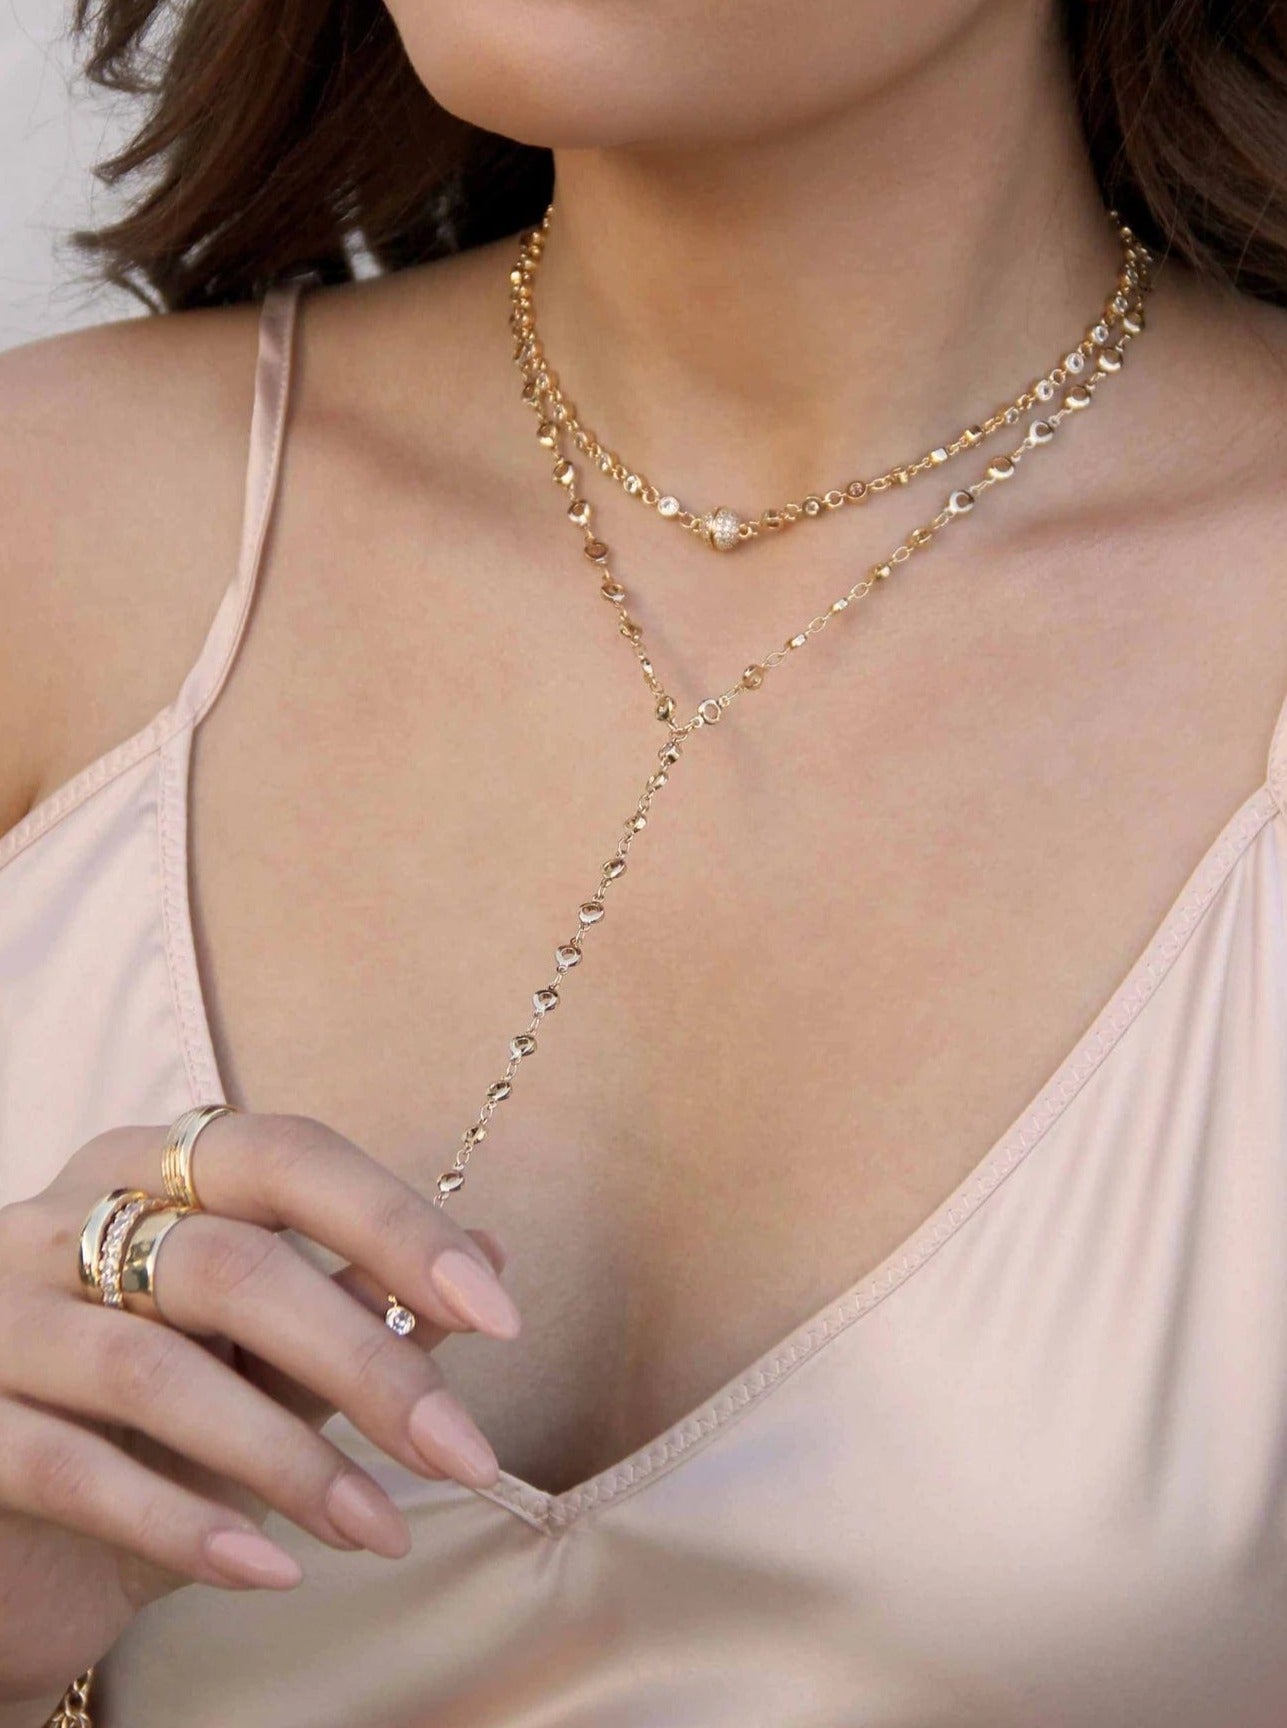 ettika necklace 18k Gold Plated and Crystal Chain Lariat // NECKLACE (SET)